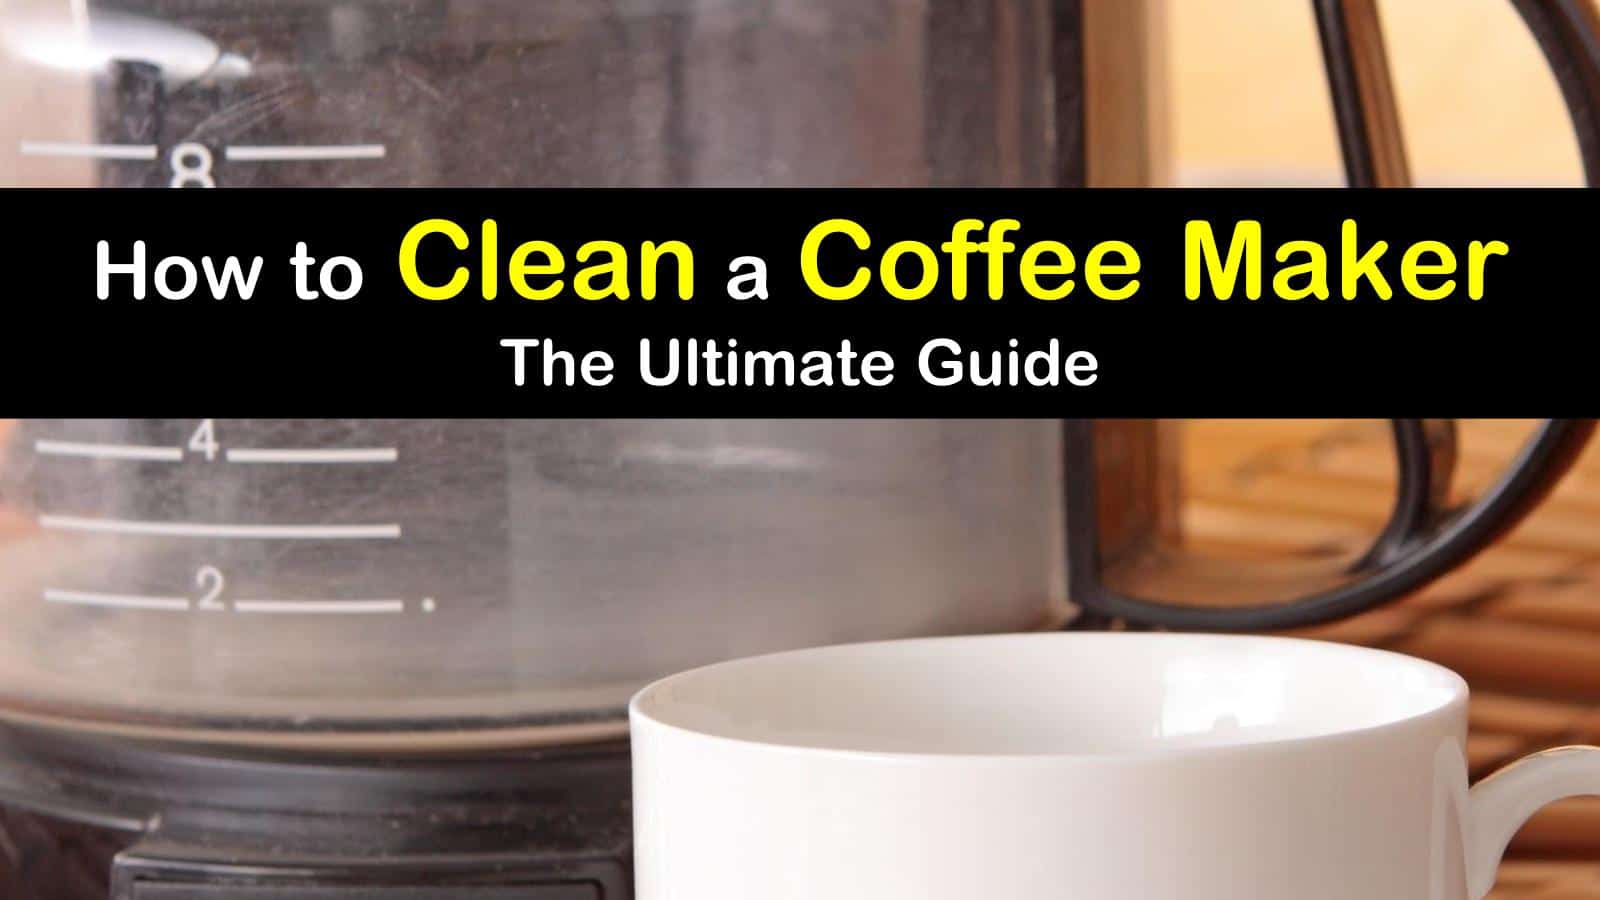 how to clean a coffee maker titlimg1